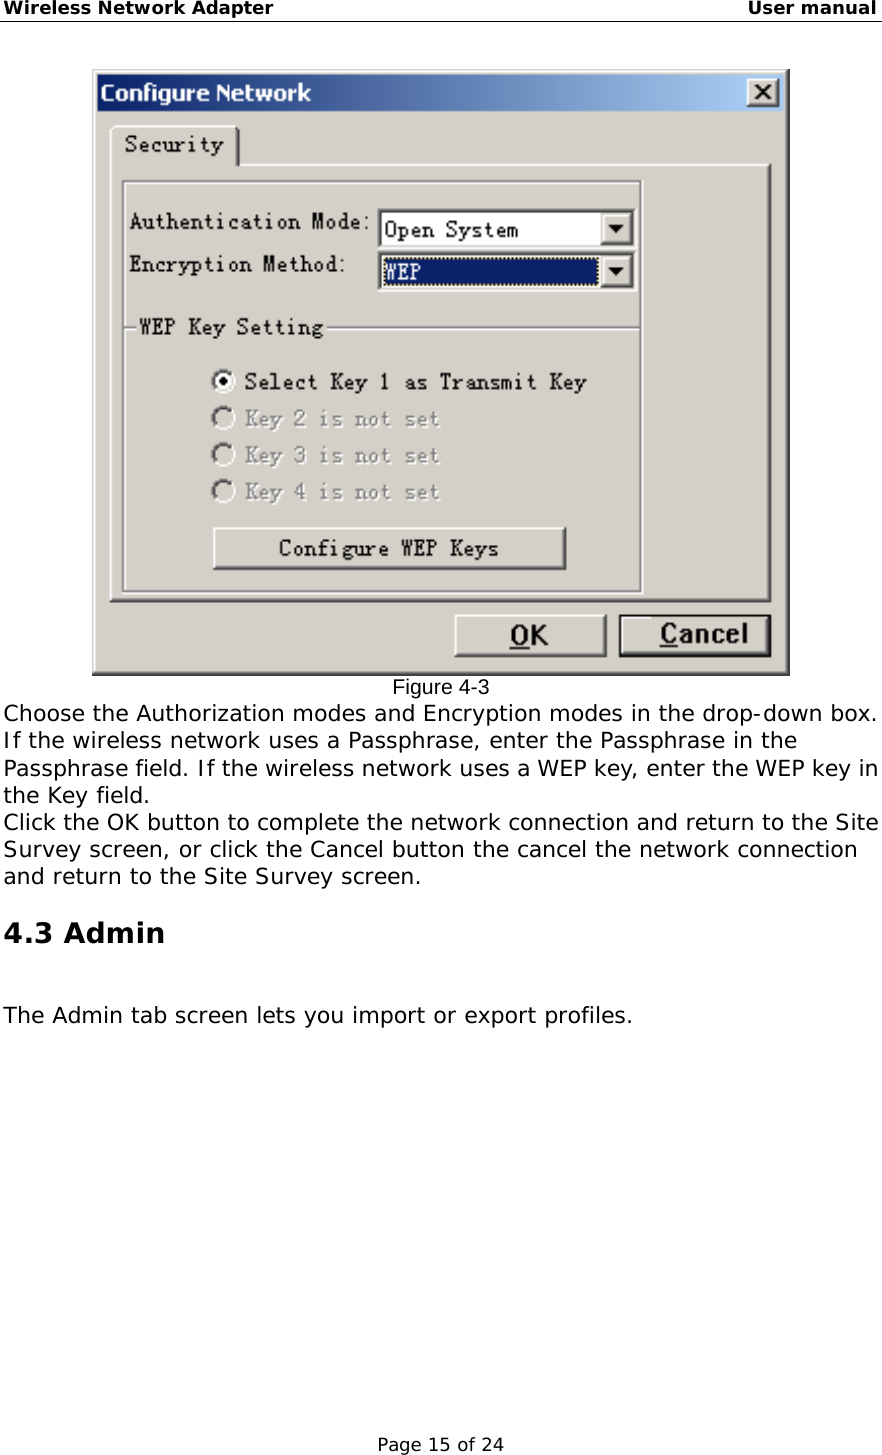 Wireless Network Adapter                                                    User manual Page 15 of 24  Figure 4-3 Choose the Authorization modes and Encryption modes in the drop-down box. If the wireless network uses a Passphrase, enter the Passphrase in the Passphrase field. If the wireless network uses a WEP key, enter the WEP key in the Key field.  Click the OK button to complete the network connection and return to the Site Survey screen, or click the Cancel button the cancel the network connection and return to the Site Survey screen. 4.3 Admin  The Admin tab screen lets you import or export profiles.  